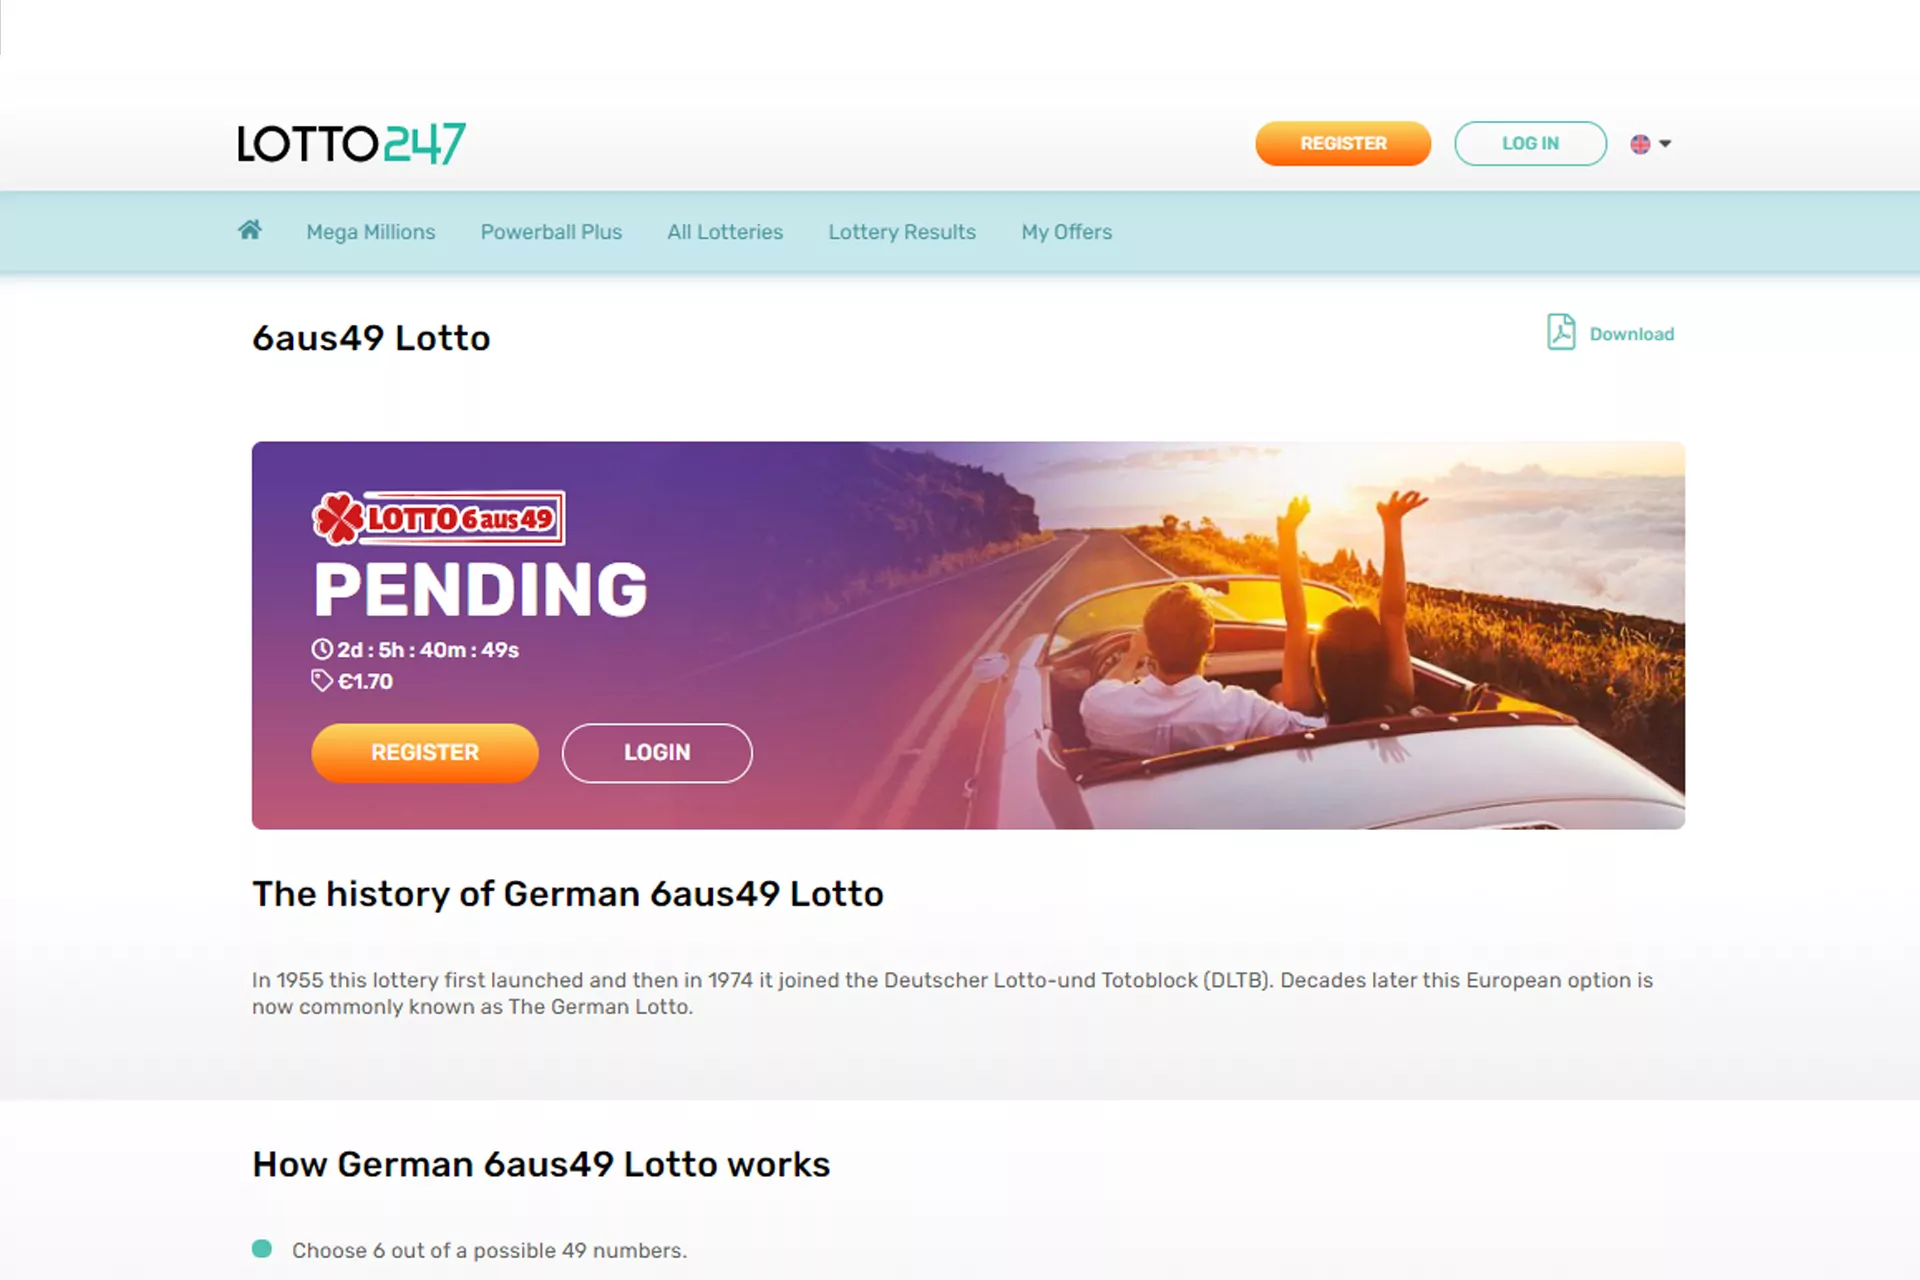 One of the oldest lotteries that give you a chance to win over 25 million euros.